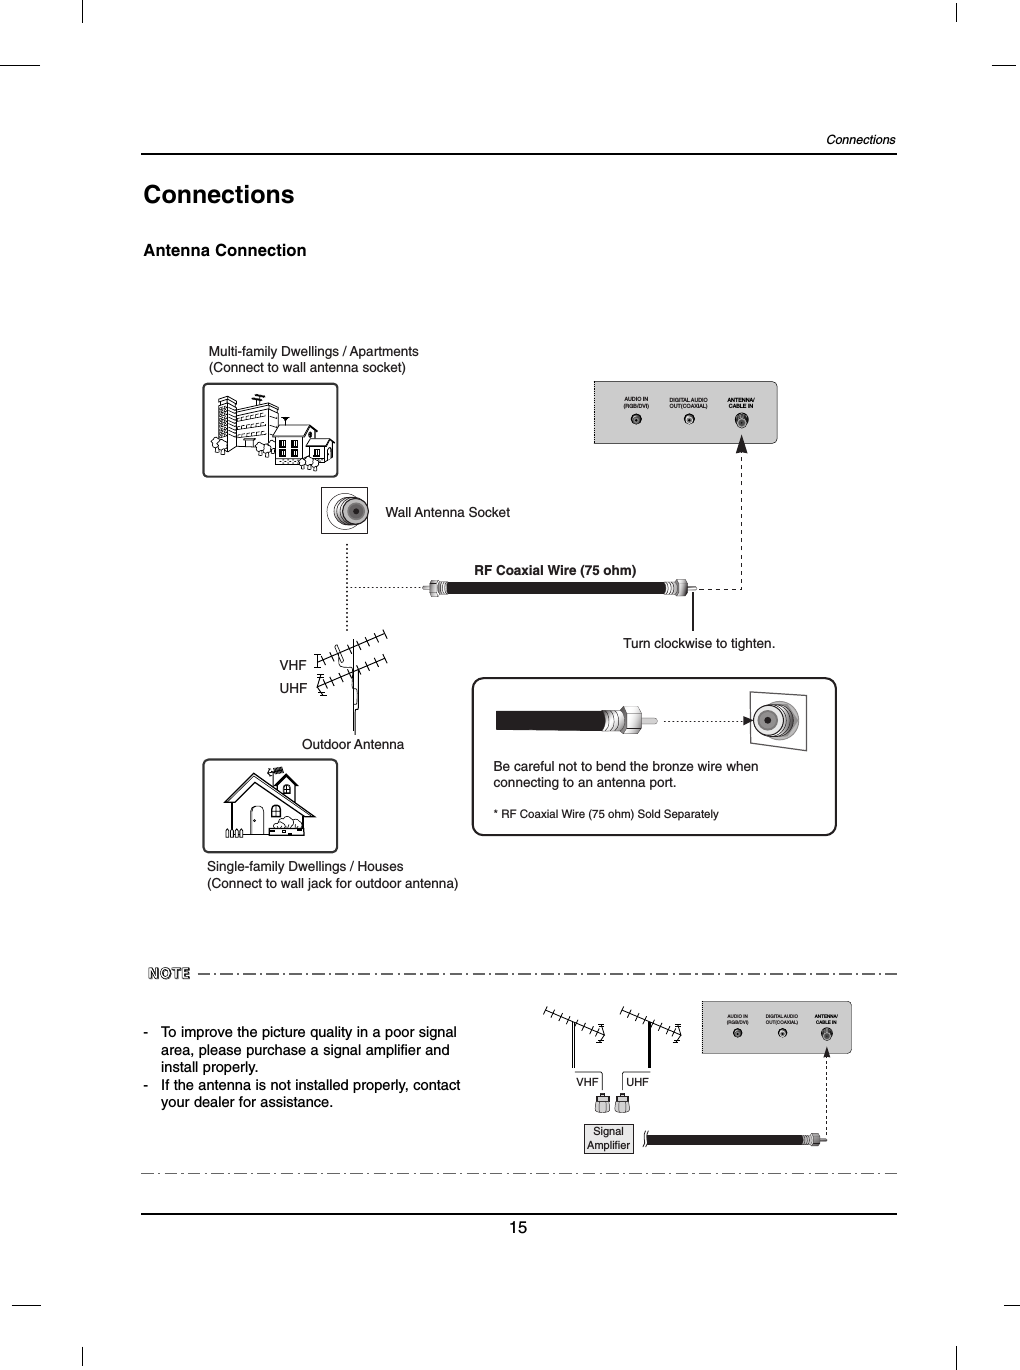 Connections15ConnectionsAntenna ConnectionAUDIO IN(RGB/DVI)ANTENNA/CABLE INDIGITAL AUDIOOUT(COAXIAL)Multi-family Dwellings / Apartments(Connect to wall antenna socket)Single-family Dwellings / Houses(Connect to wall jack for outdoor antenna)Wall Antenna SocketRF Coaxial Wire (75 ohm)VHFUHFOutdoor AntennaTurn clockwise to tighten.Be careful not to bend the bronze wire whenconnecting to an antenna port.* RF Coaxial Wire (75 ohm) Sold Separately -To improve the picture quality in a poor signalarea, please purchase a signal amplifier andinstall properly.-If the antenna is not installed properly, contactyour dealer for assistance.NNNNOOOOTTTTEEEEVHF UHFSignalAmplifierAUDIO IN(RGB/DVI)ANTENNA/CABLE INDIGITAL AUDIOOUT(COAXIAL)